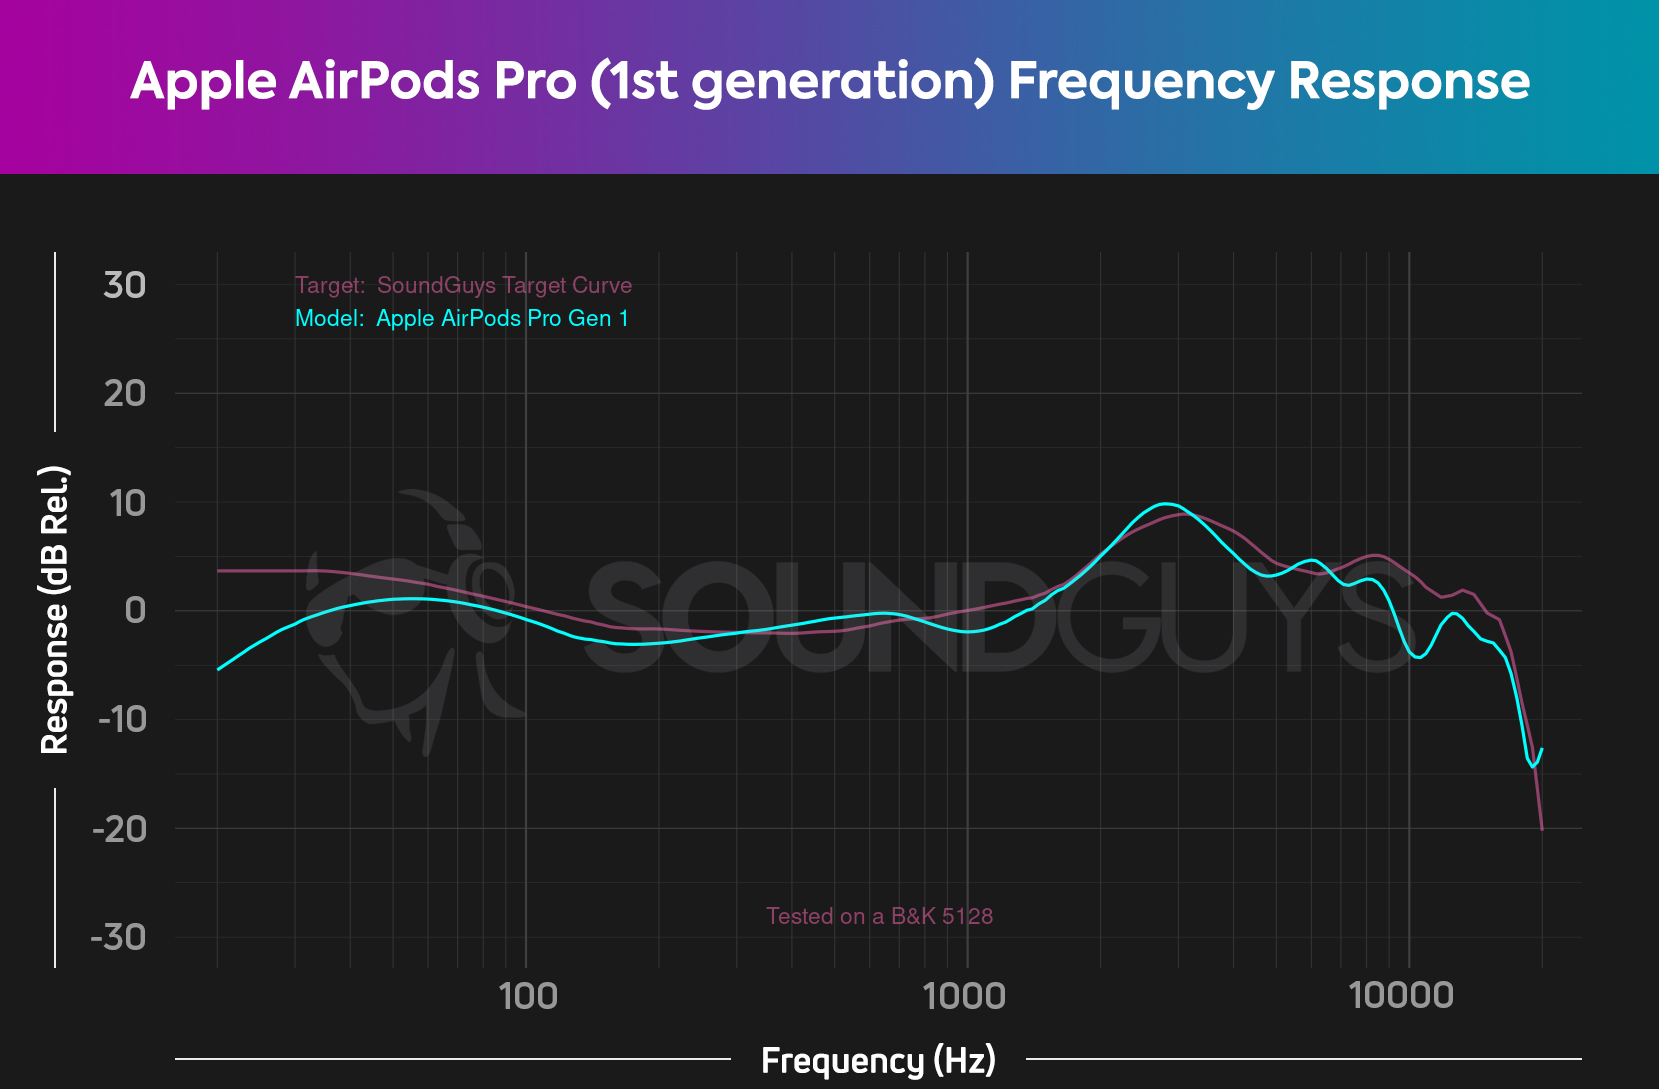 A chart depicts the Apple AirPods Pro 1st generation updated frequency response.